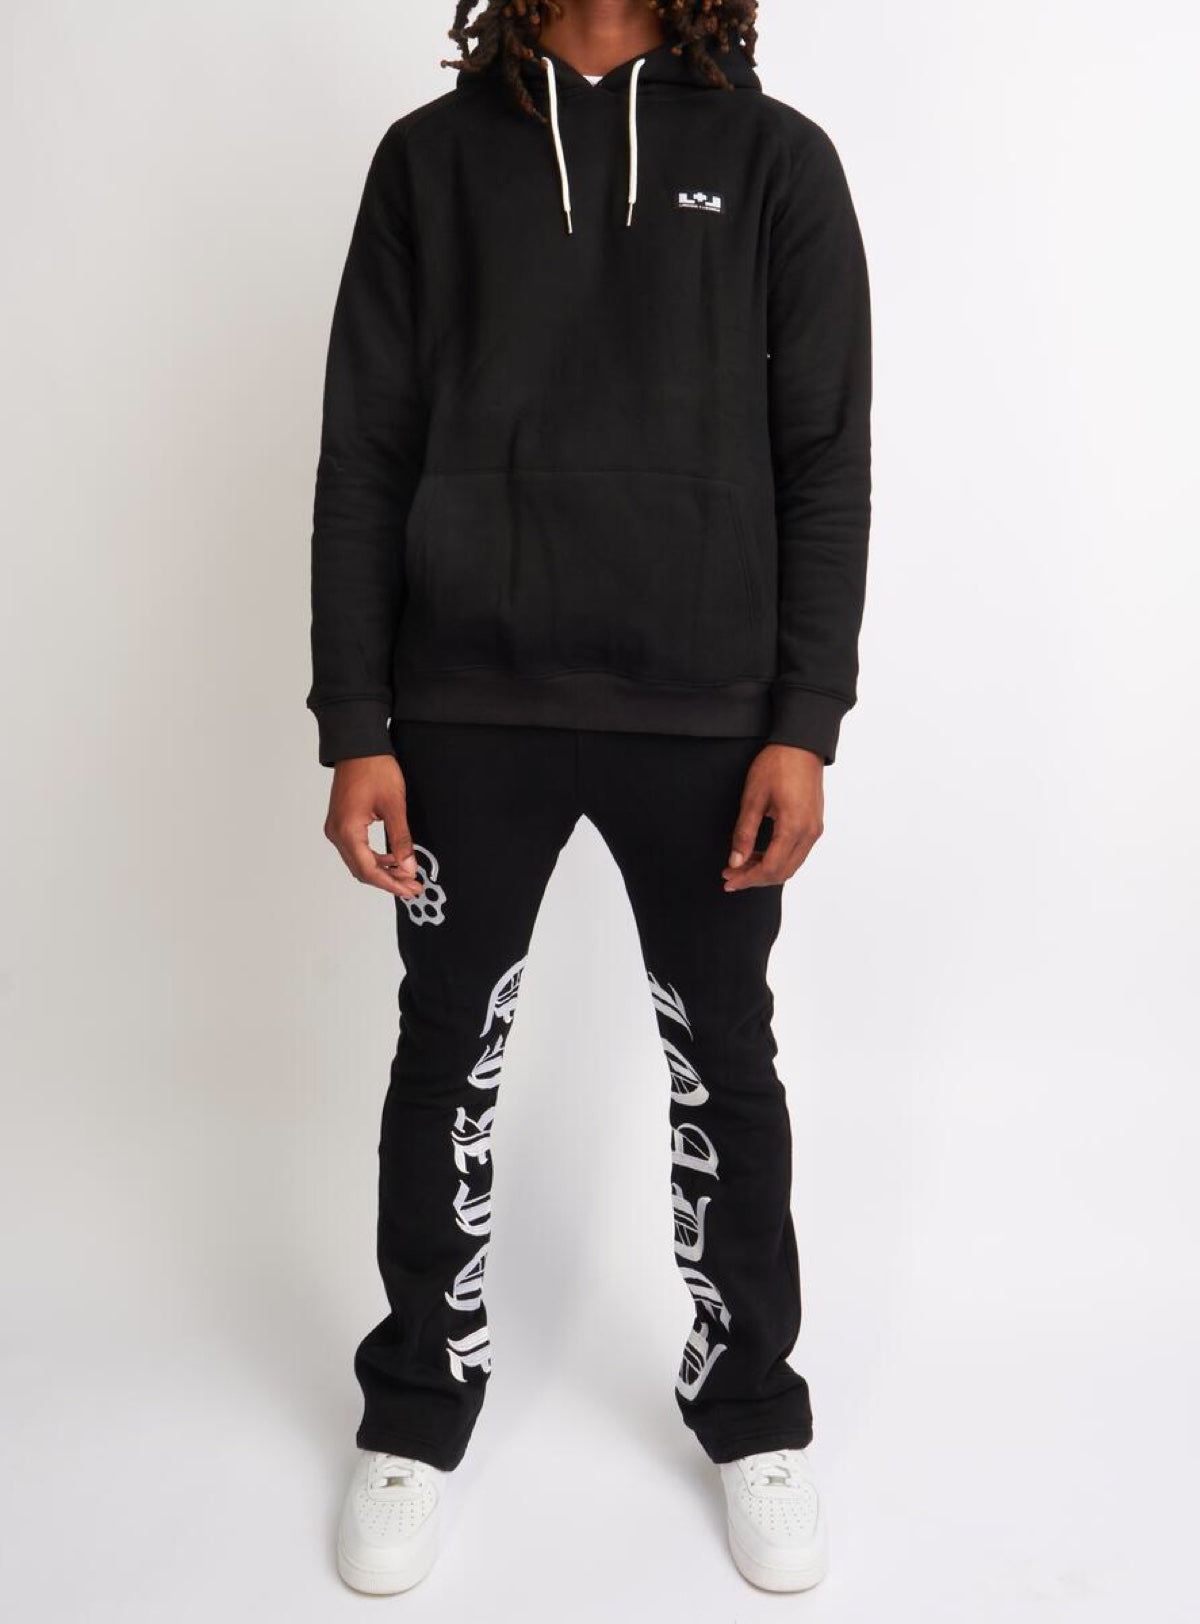 Locked & Loaded Sweatsuit - Chamber - Black And White - 352